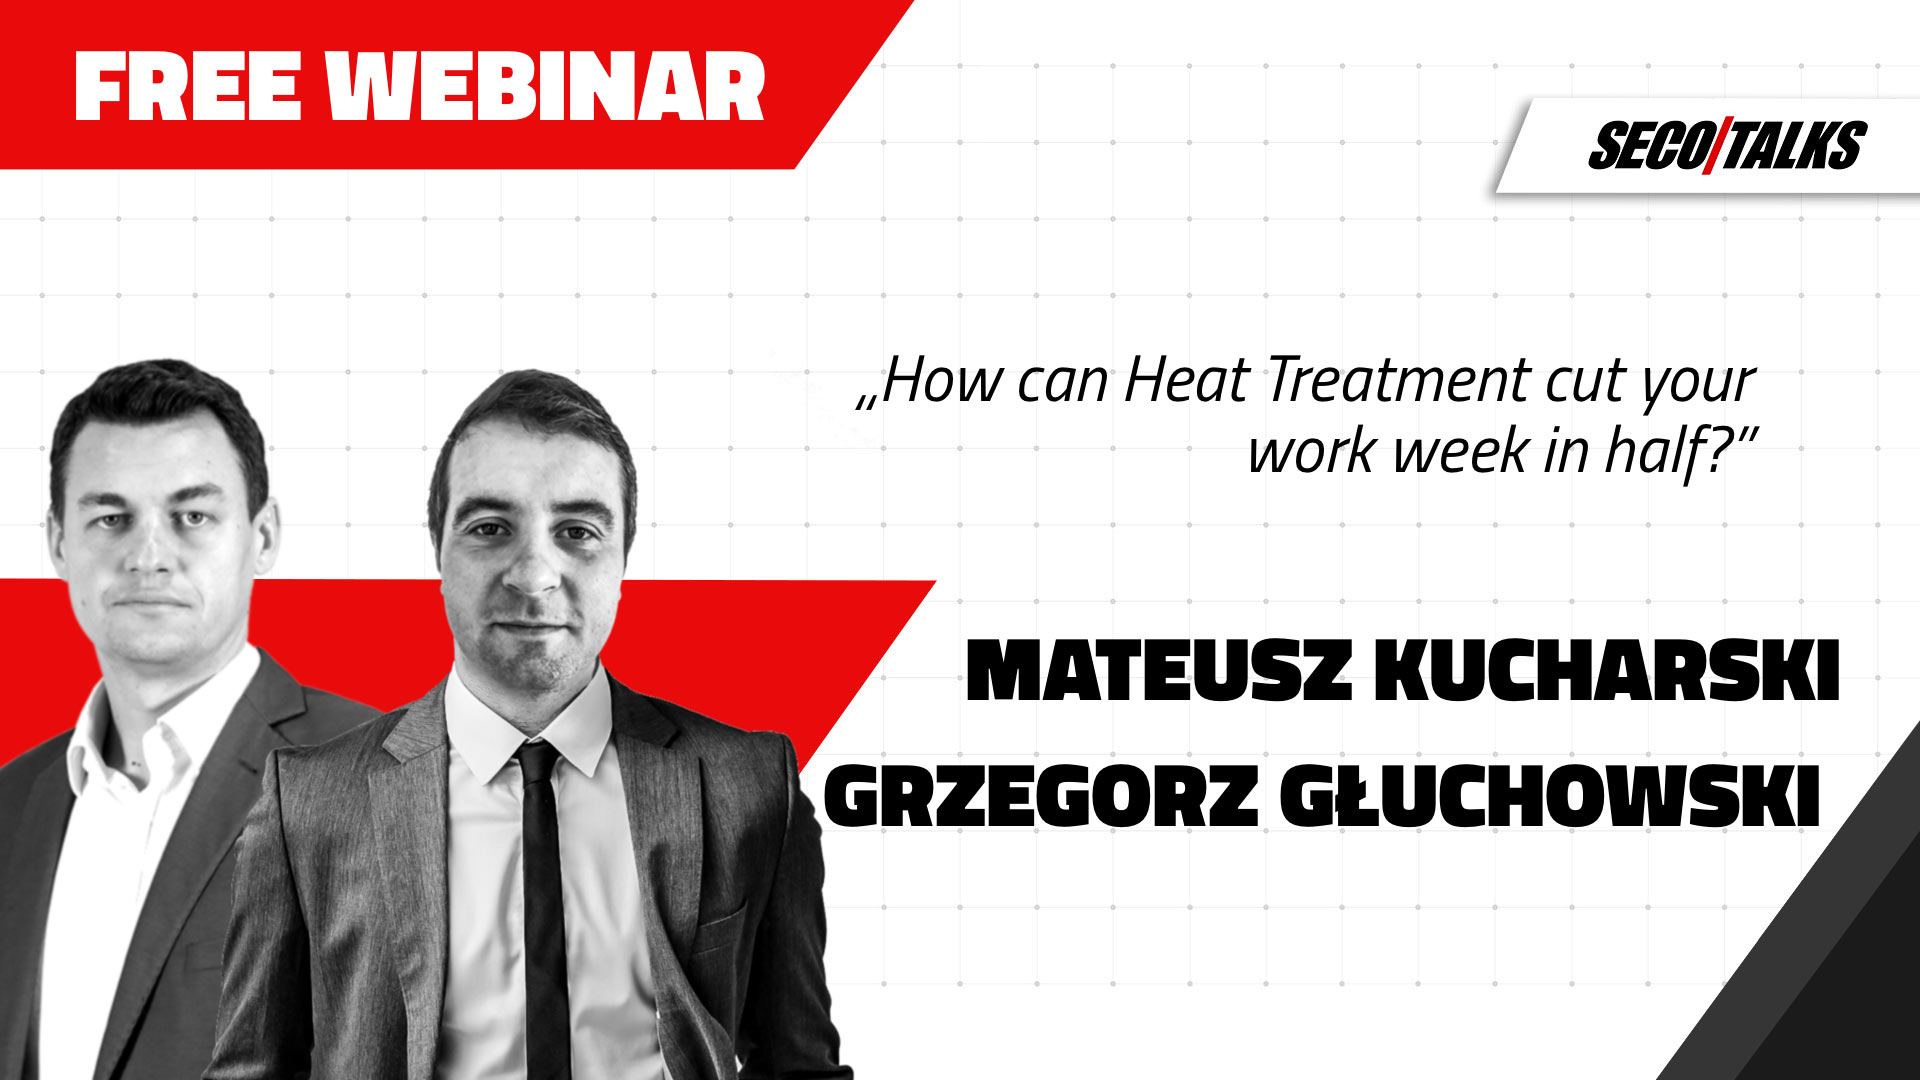 How can Heat Treatment cut your work week in half?